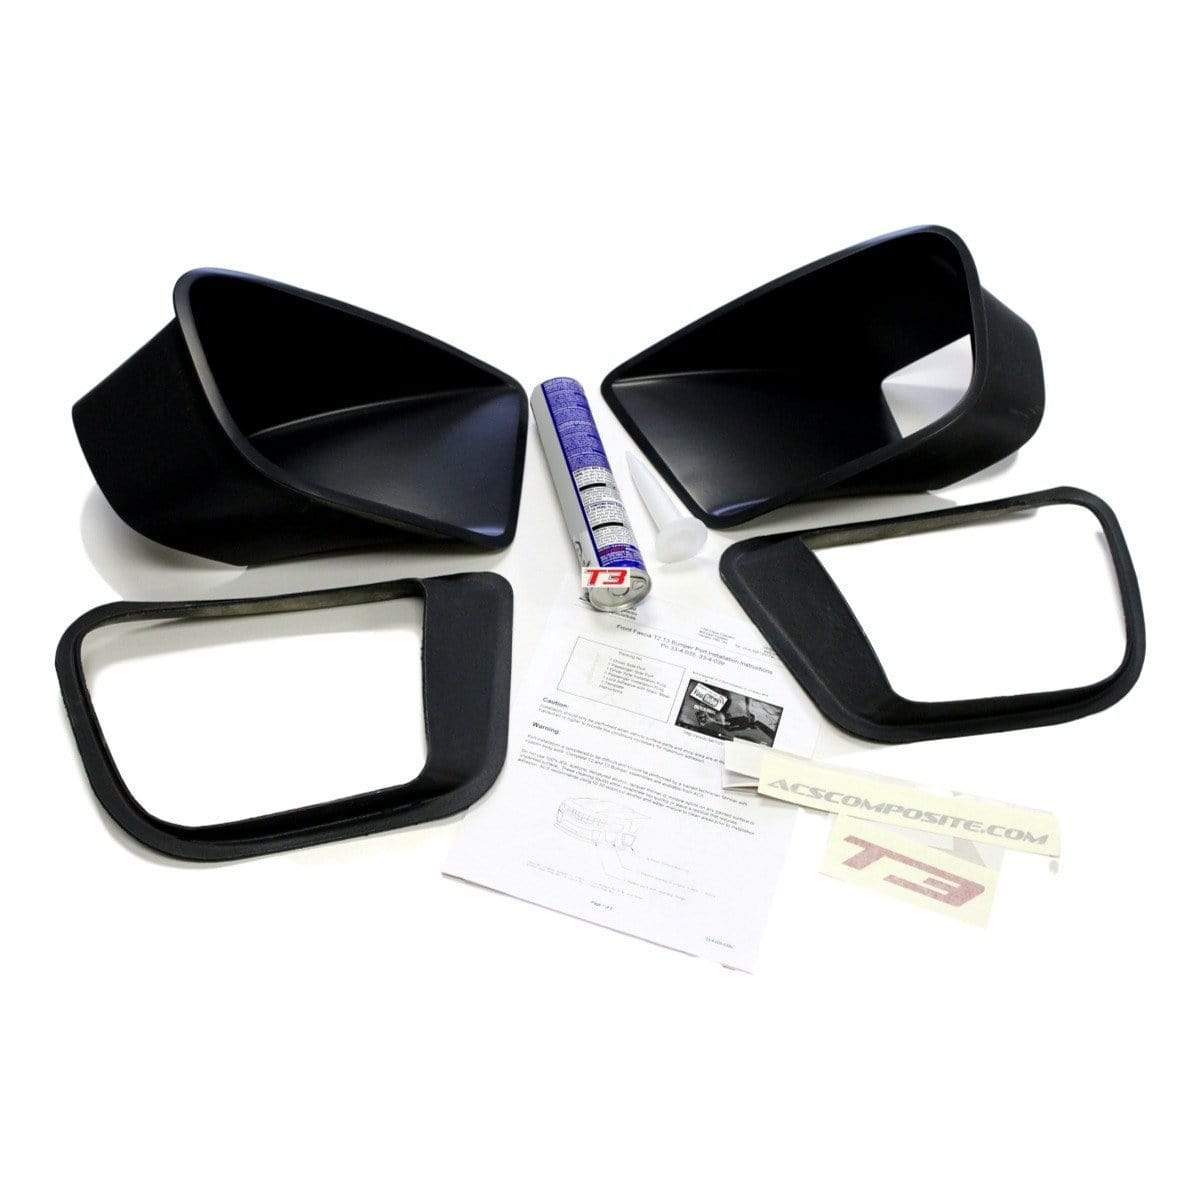 ACS Composite T3/S Front Bumper Ports [33-4-036]PRM for Camaro SS V8 - Improved Airflow & Styling Upgrade